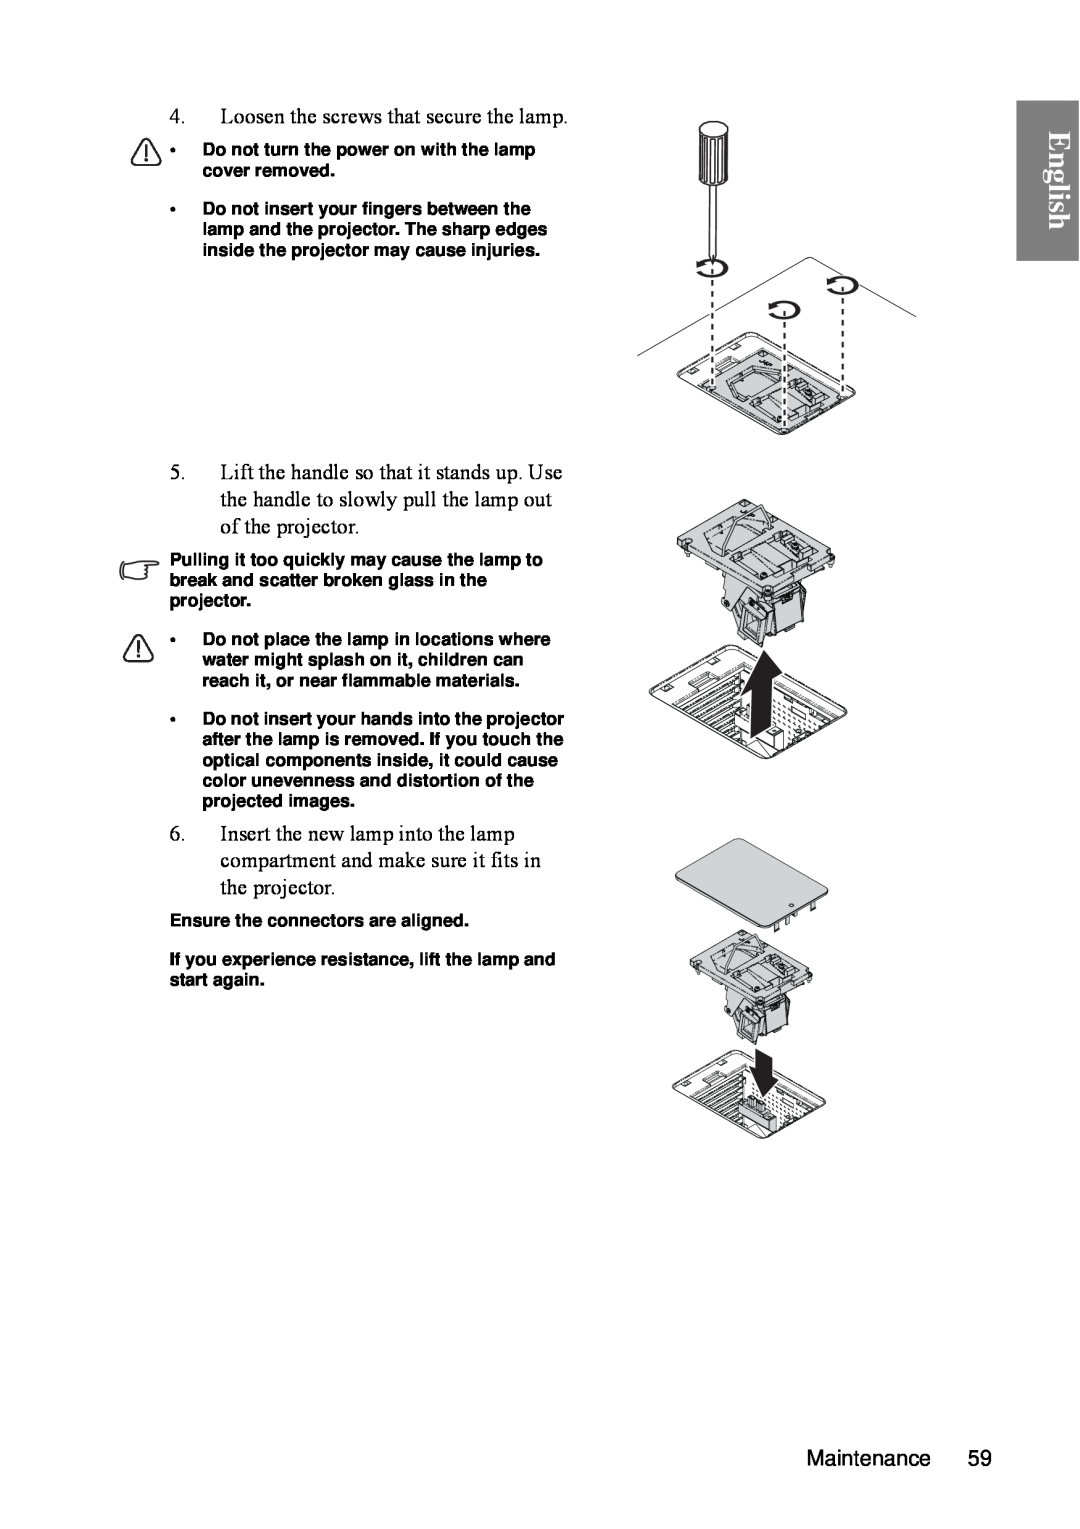 BenQ SP840 user manual English, Loosen the screws that secure the lamp 